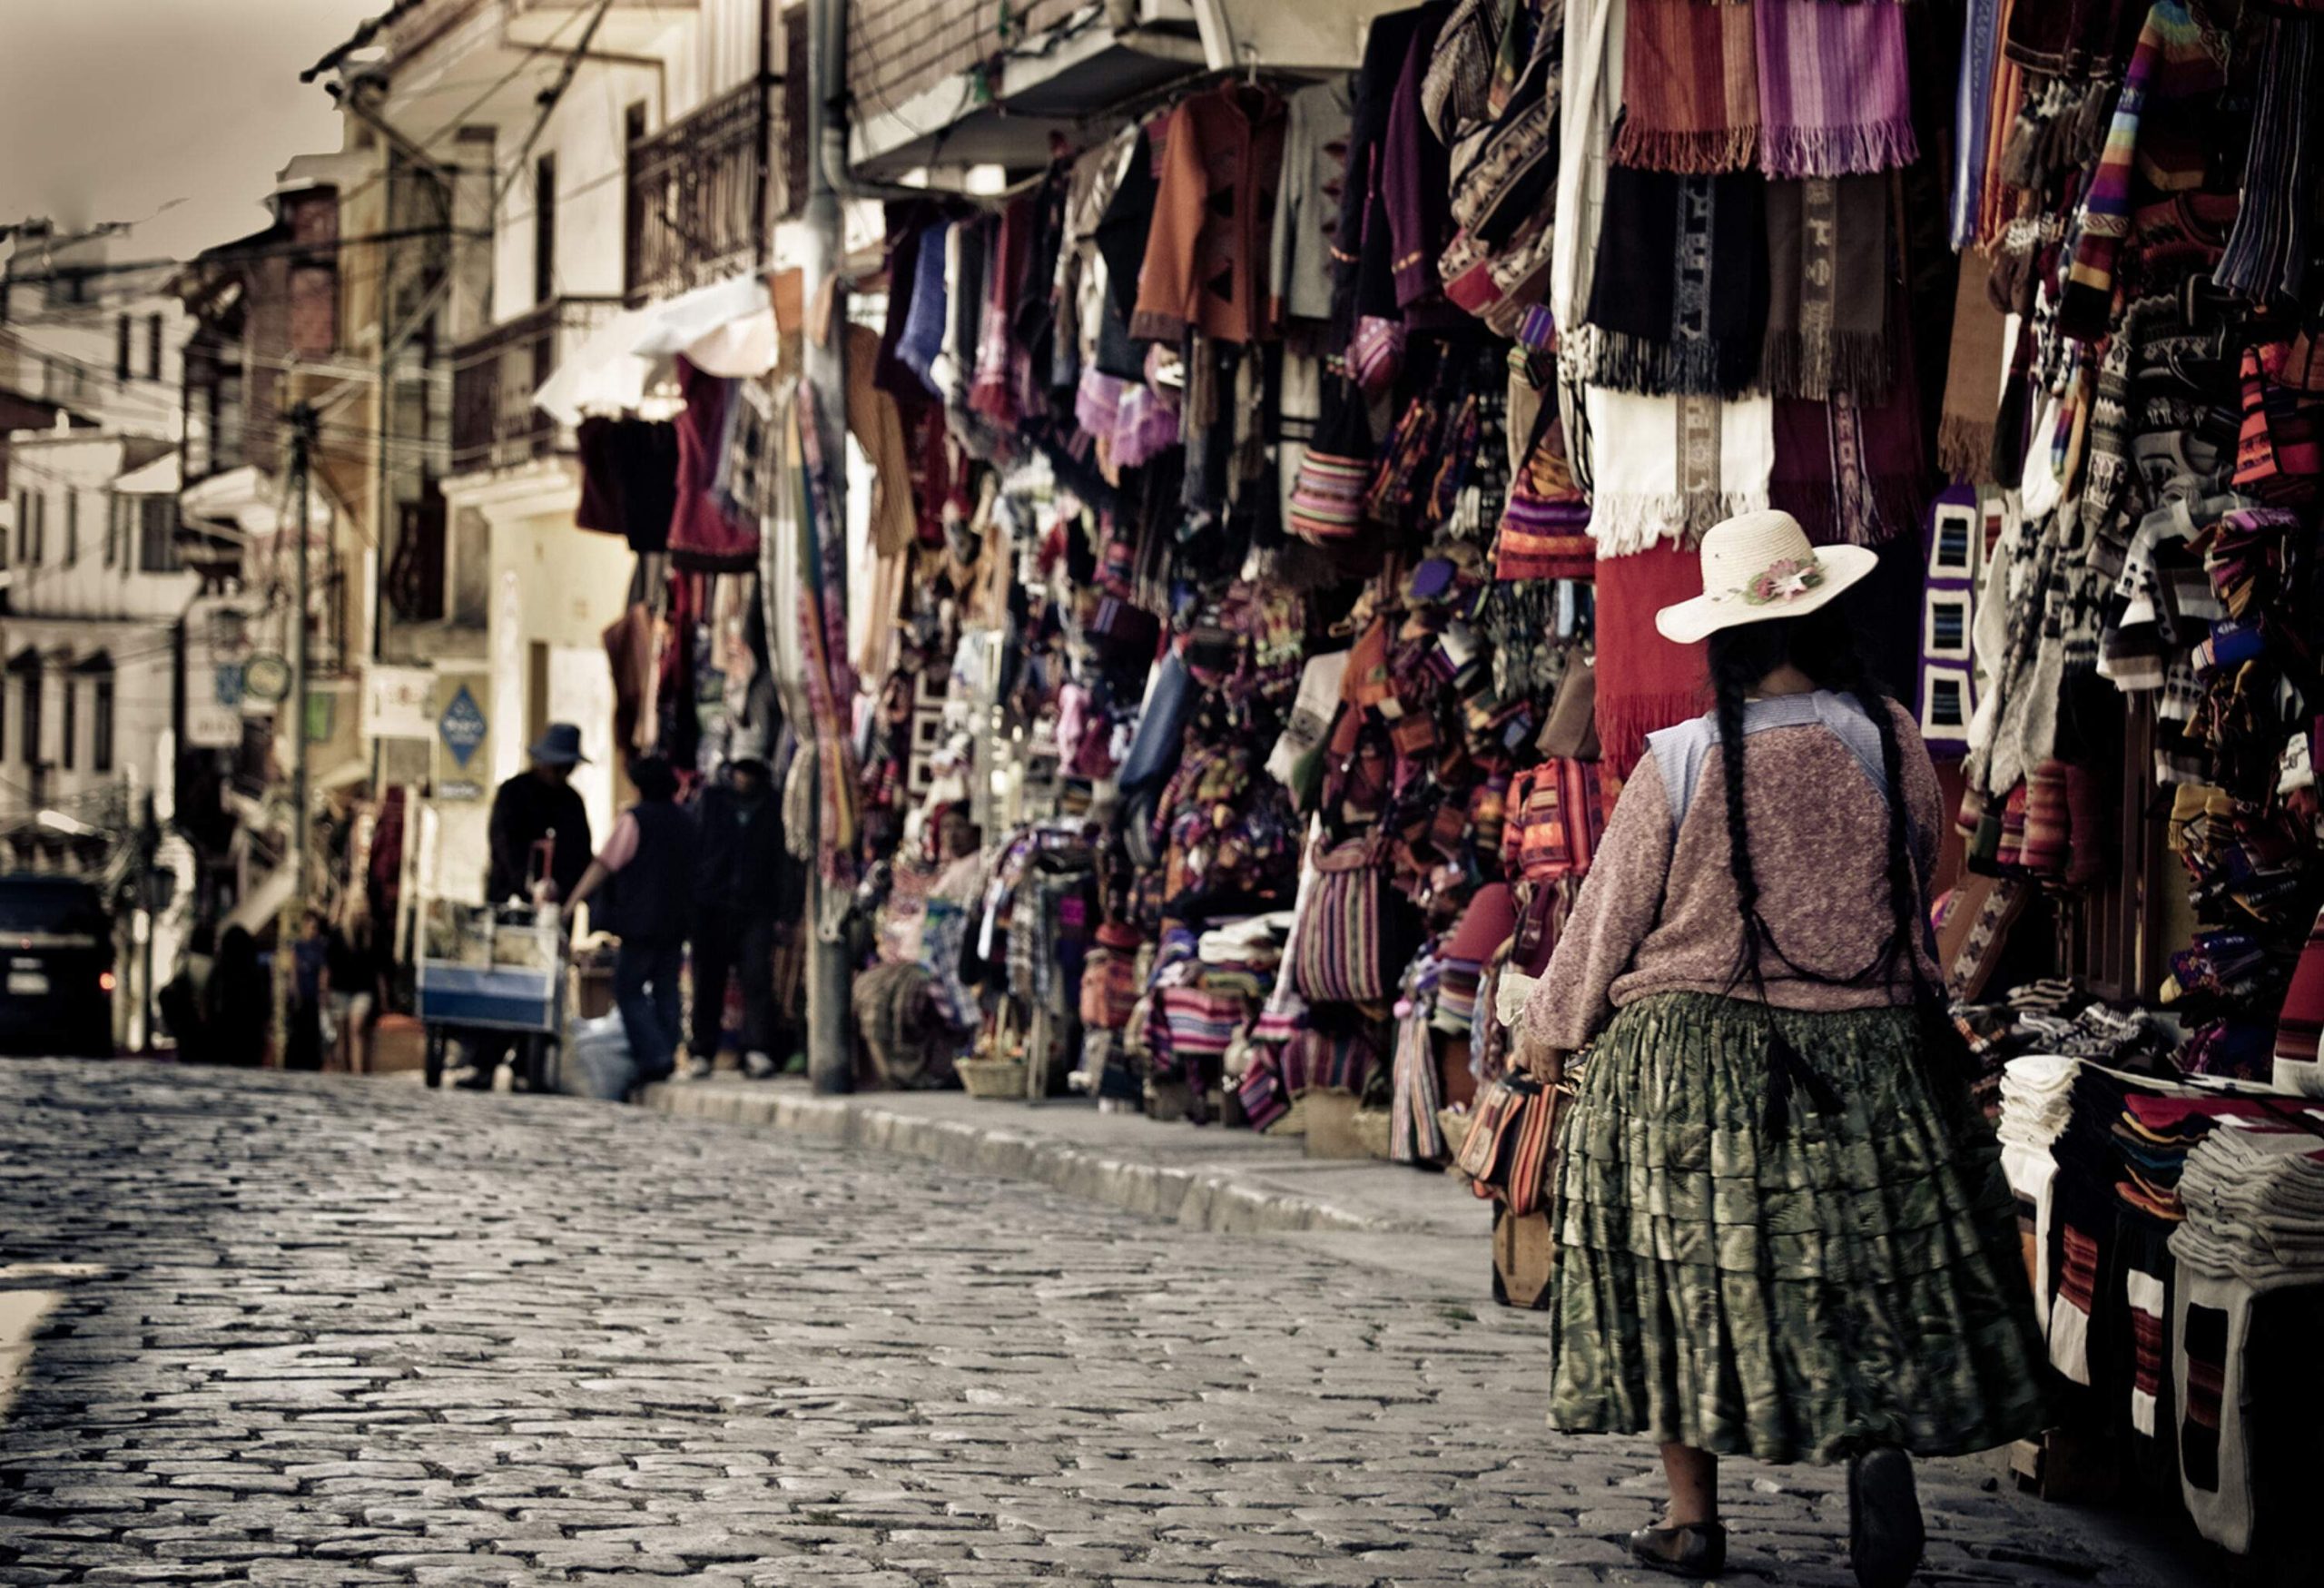 A woman in a skirt and hat walks on a cobblestone street along vendor stalls selling a variety of souvenirs.